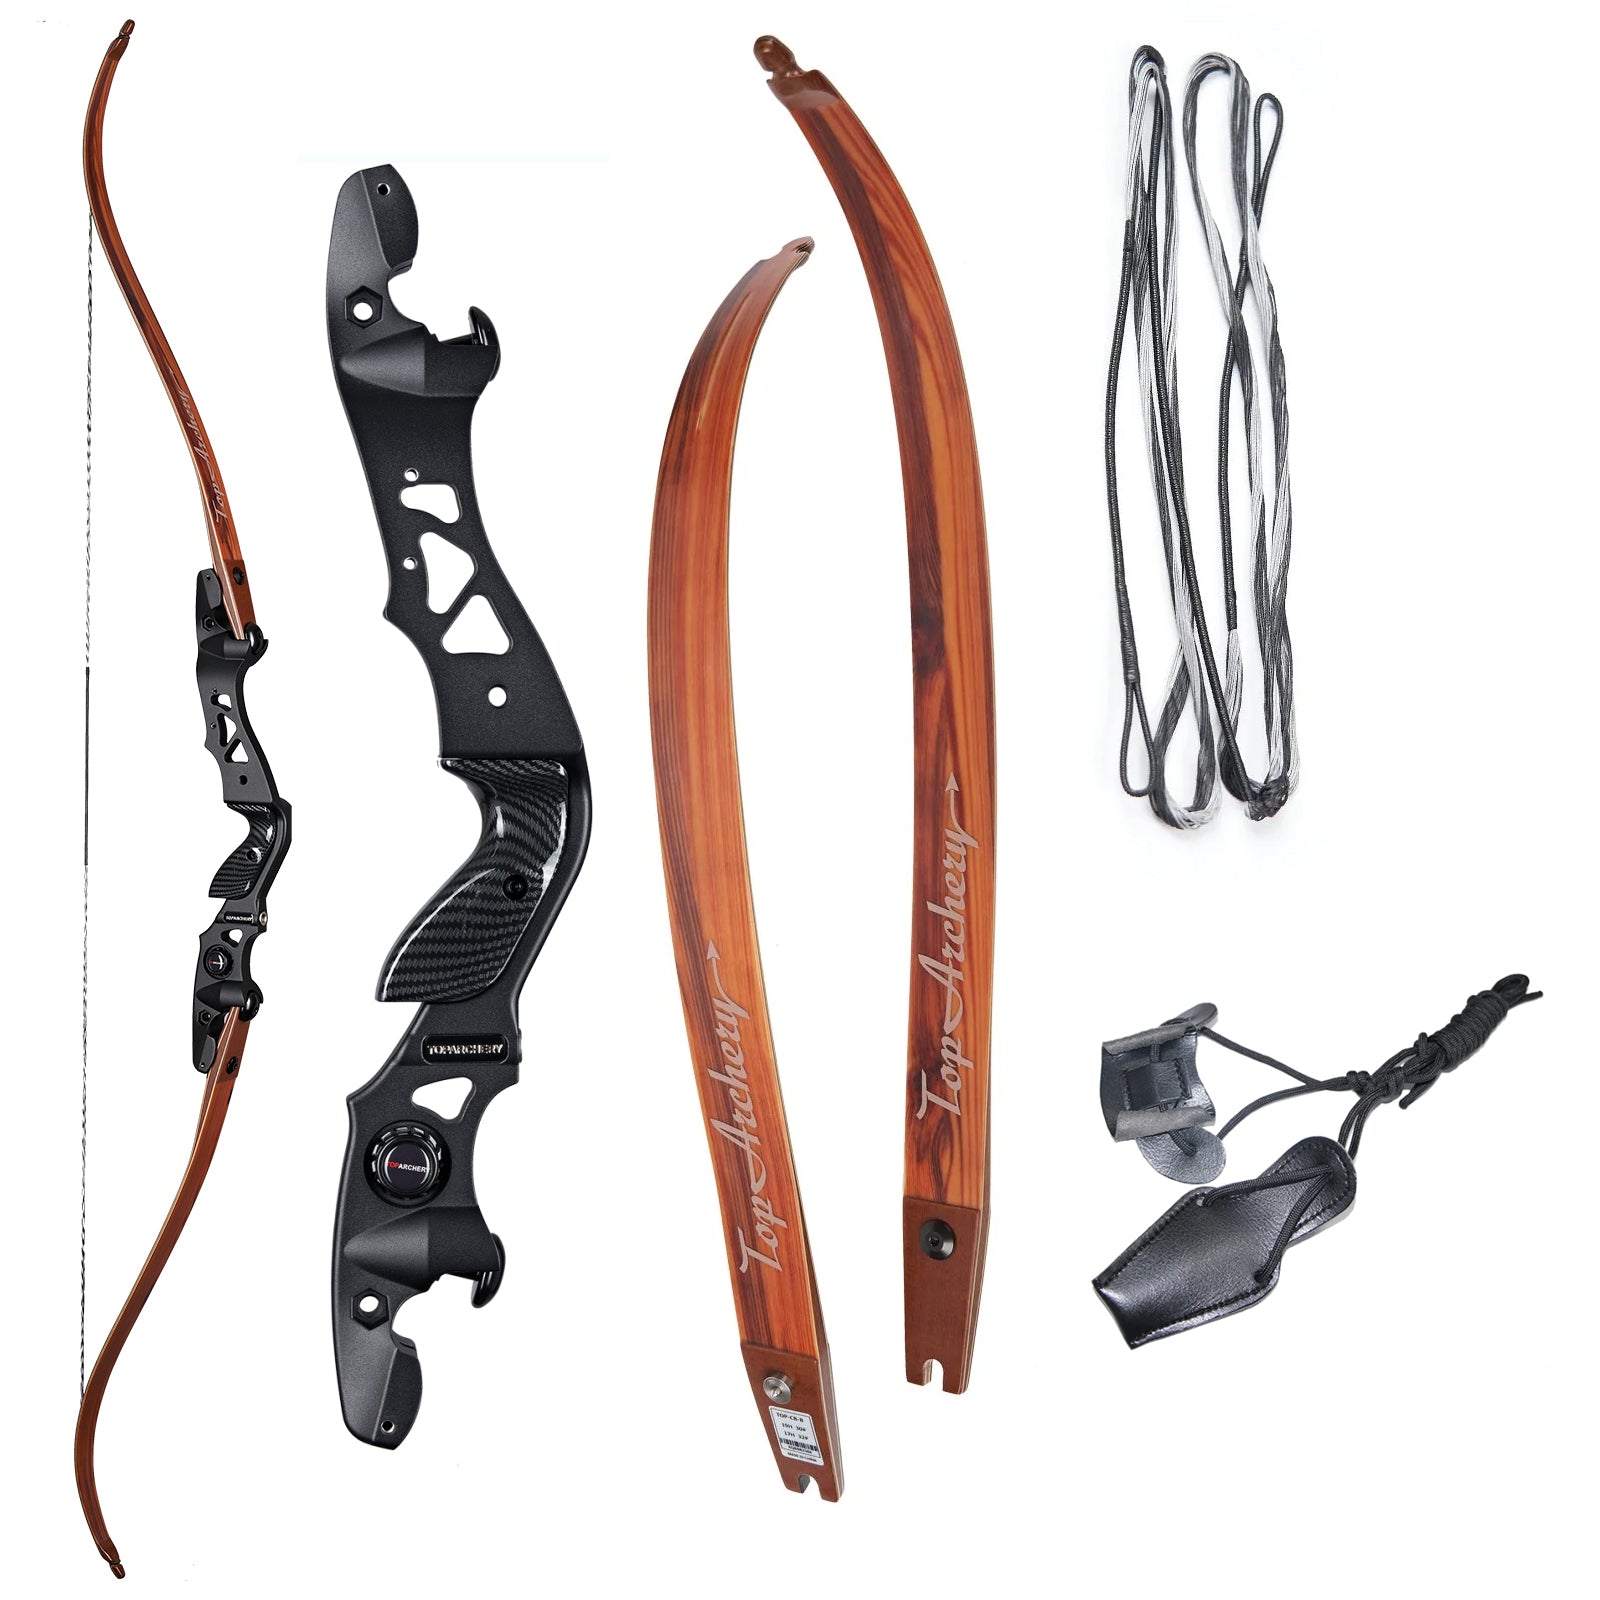 60 25-50lbs Wooden Riser Takedown Recurve Bow for Adult Archery Hunting  Bow Set